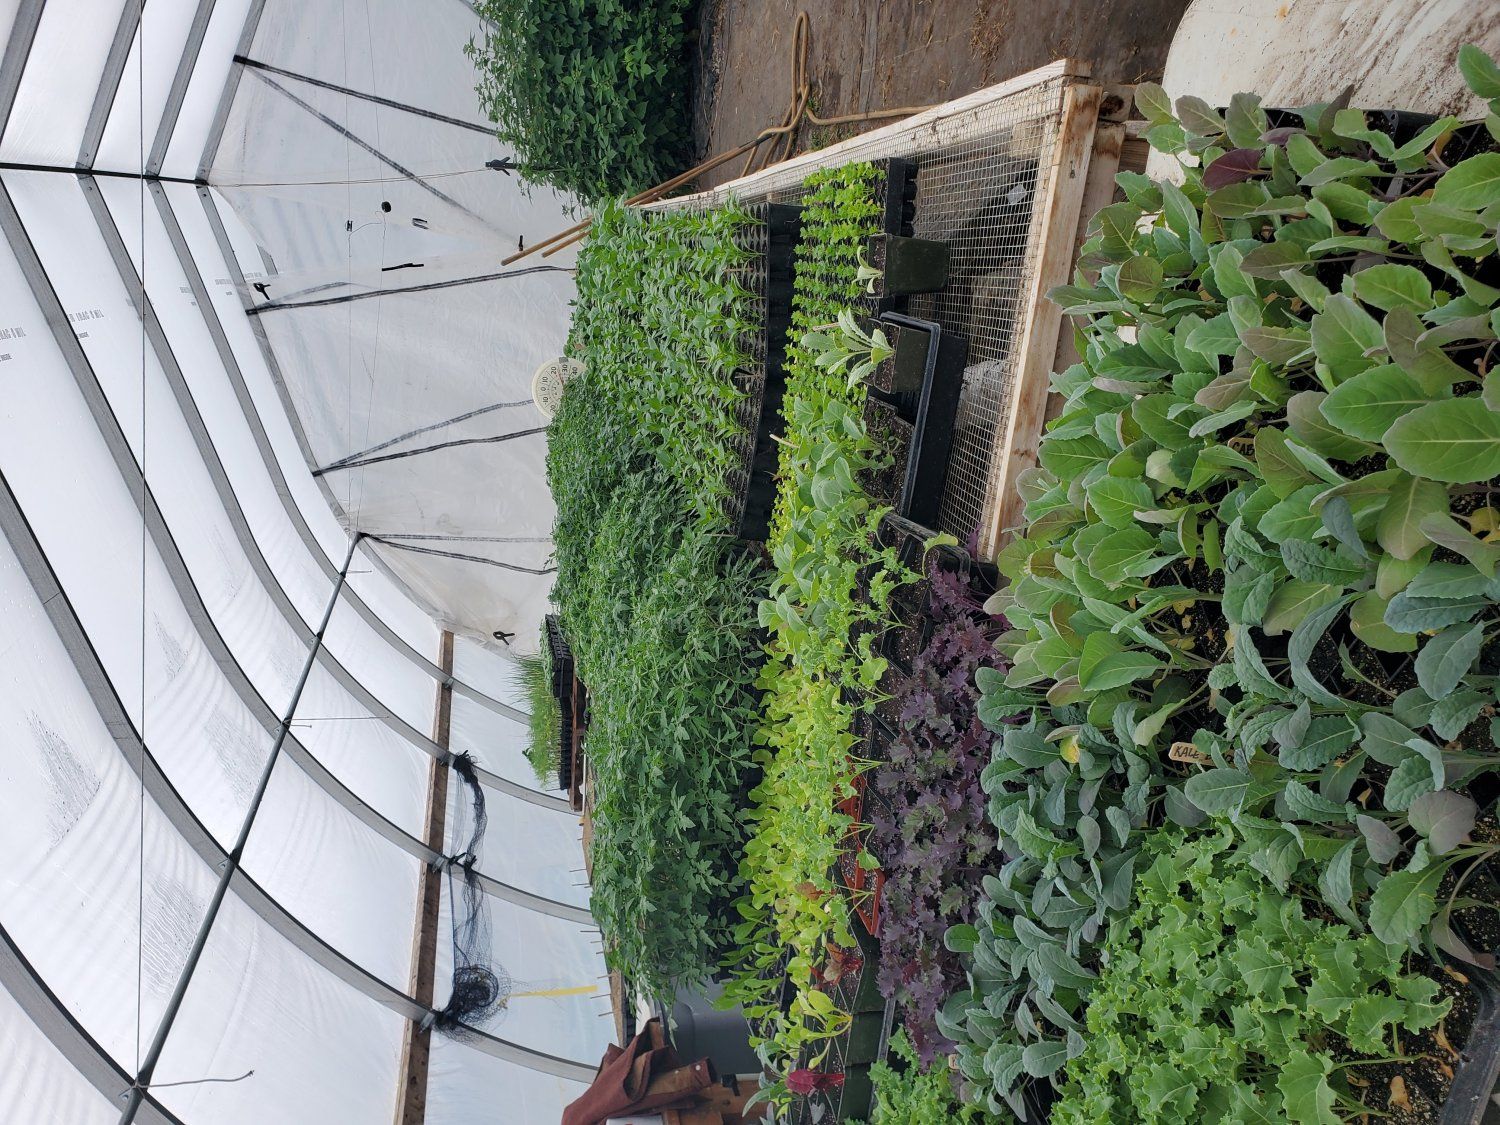 Pop Up Seedling Sale (and some produce too!)